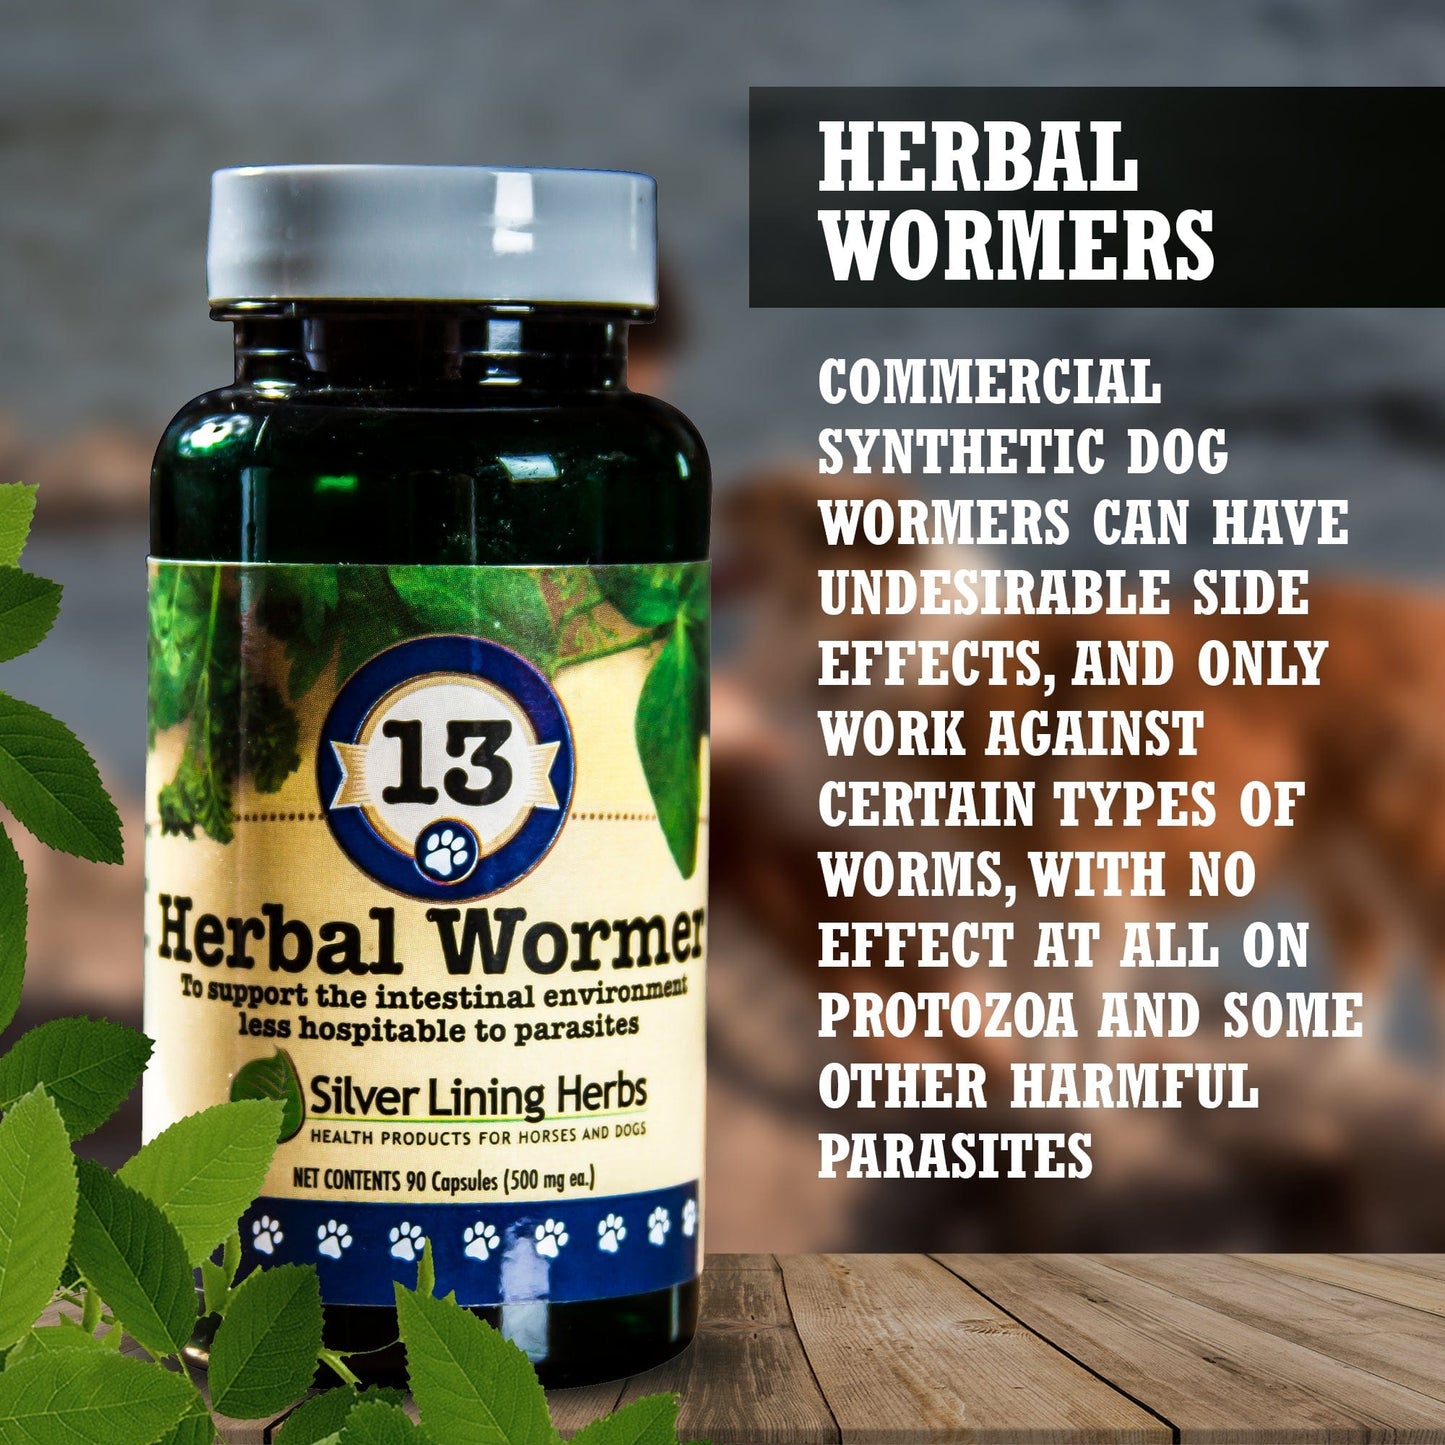 13 Herbal Wormer for Dogs - 90 Capsule - Silver Lining Herbs